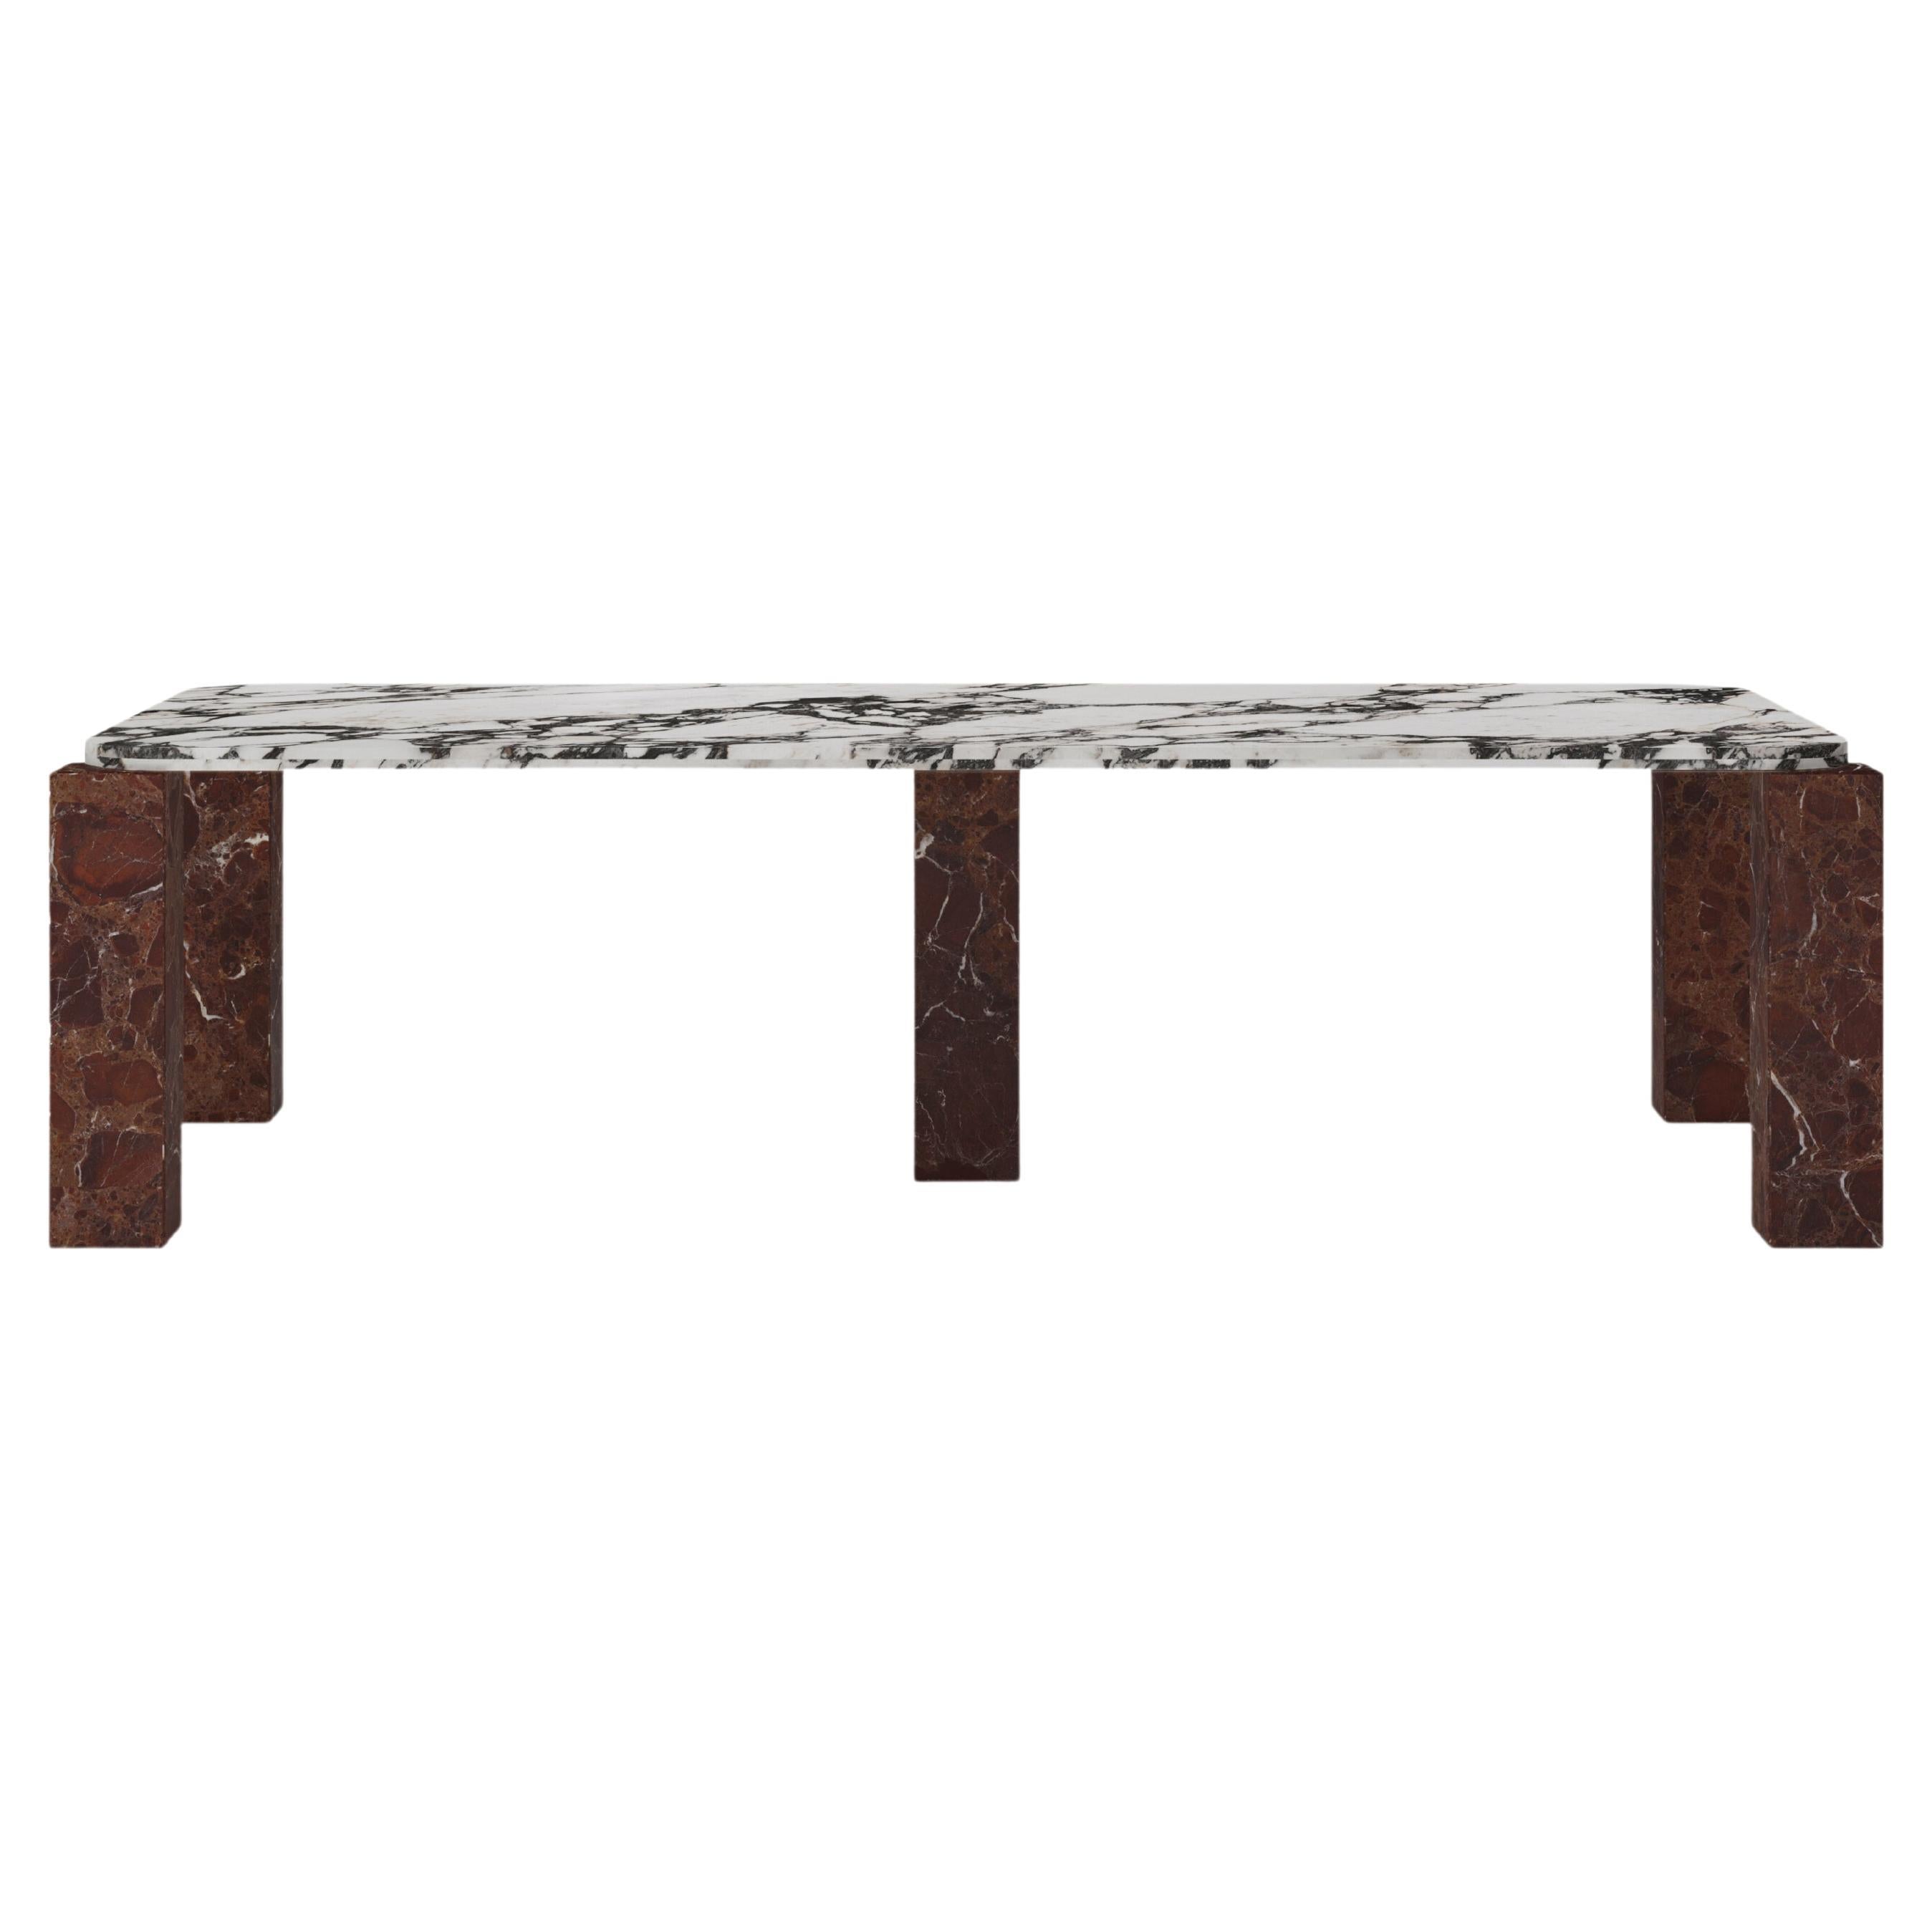 FORM(LA) Cubo Rectangle Dining Table 86”L x 44”W x 30”H Viola & Rosso Marble For Sale